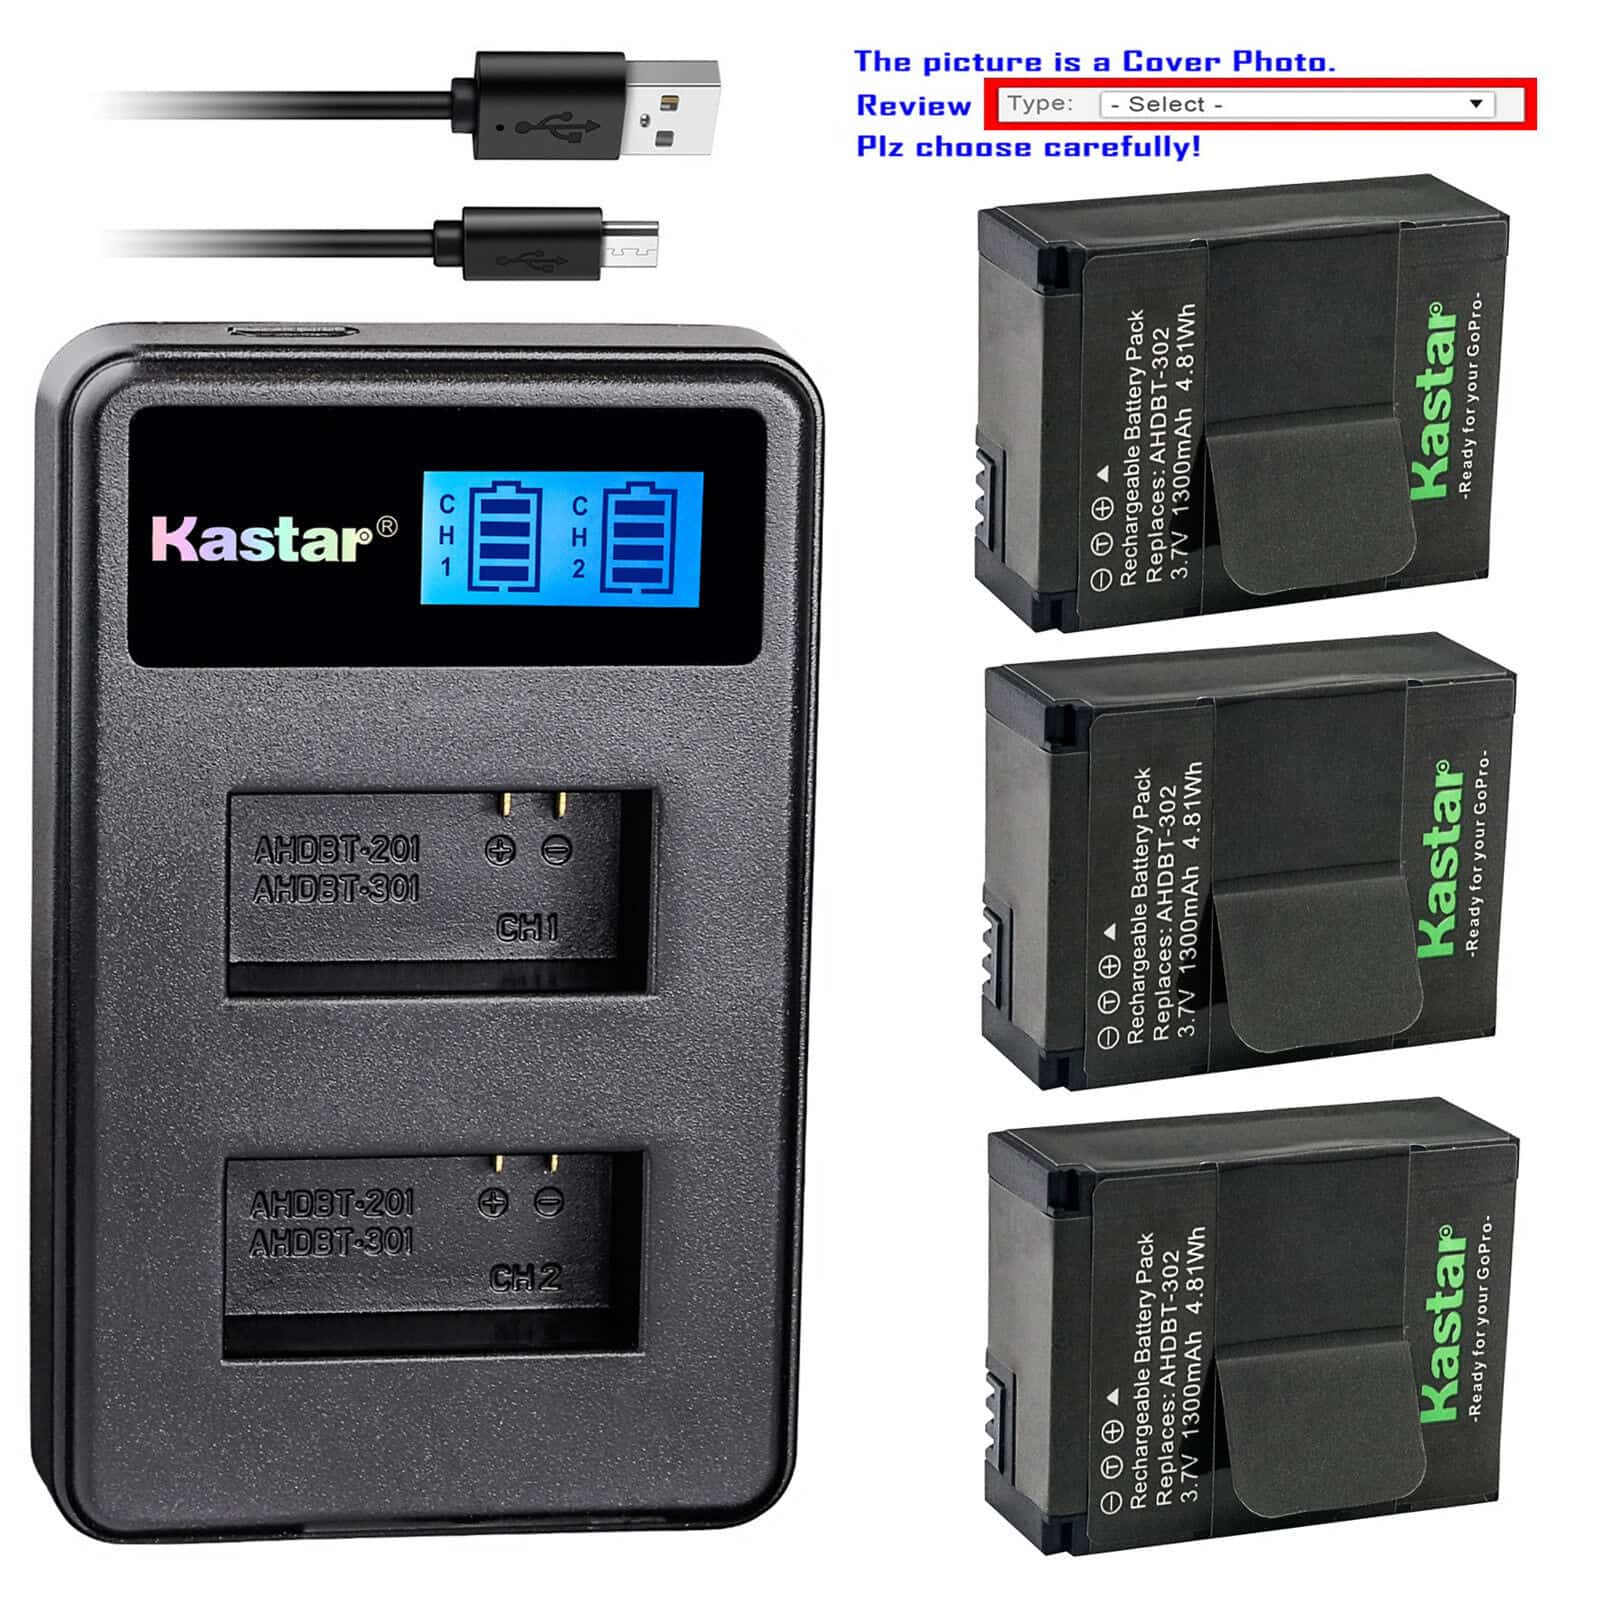 A battery charger for the canon eos 5d mark ii.